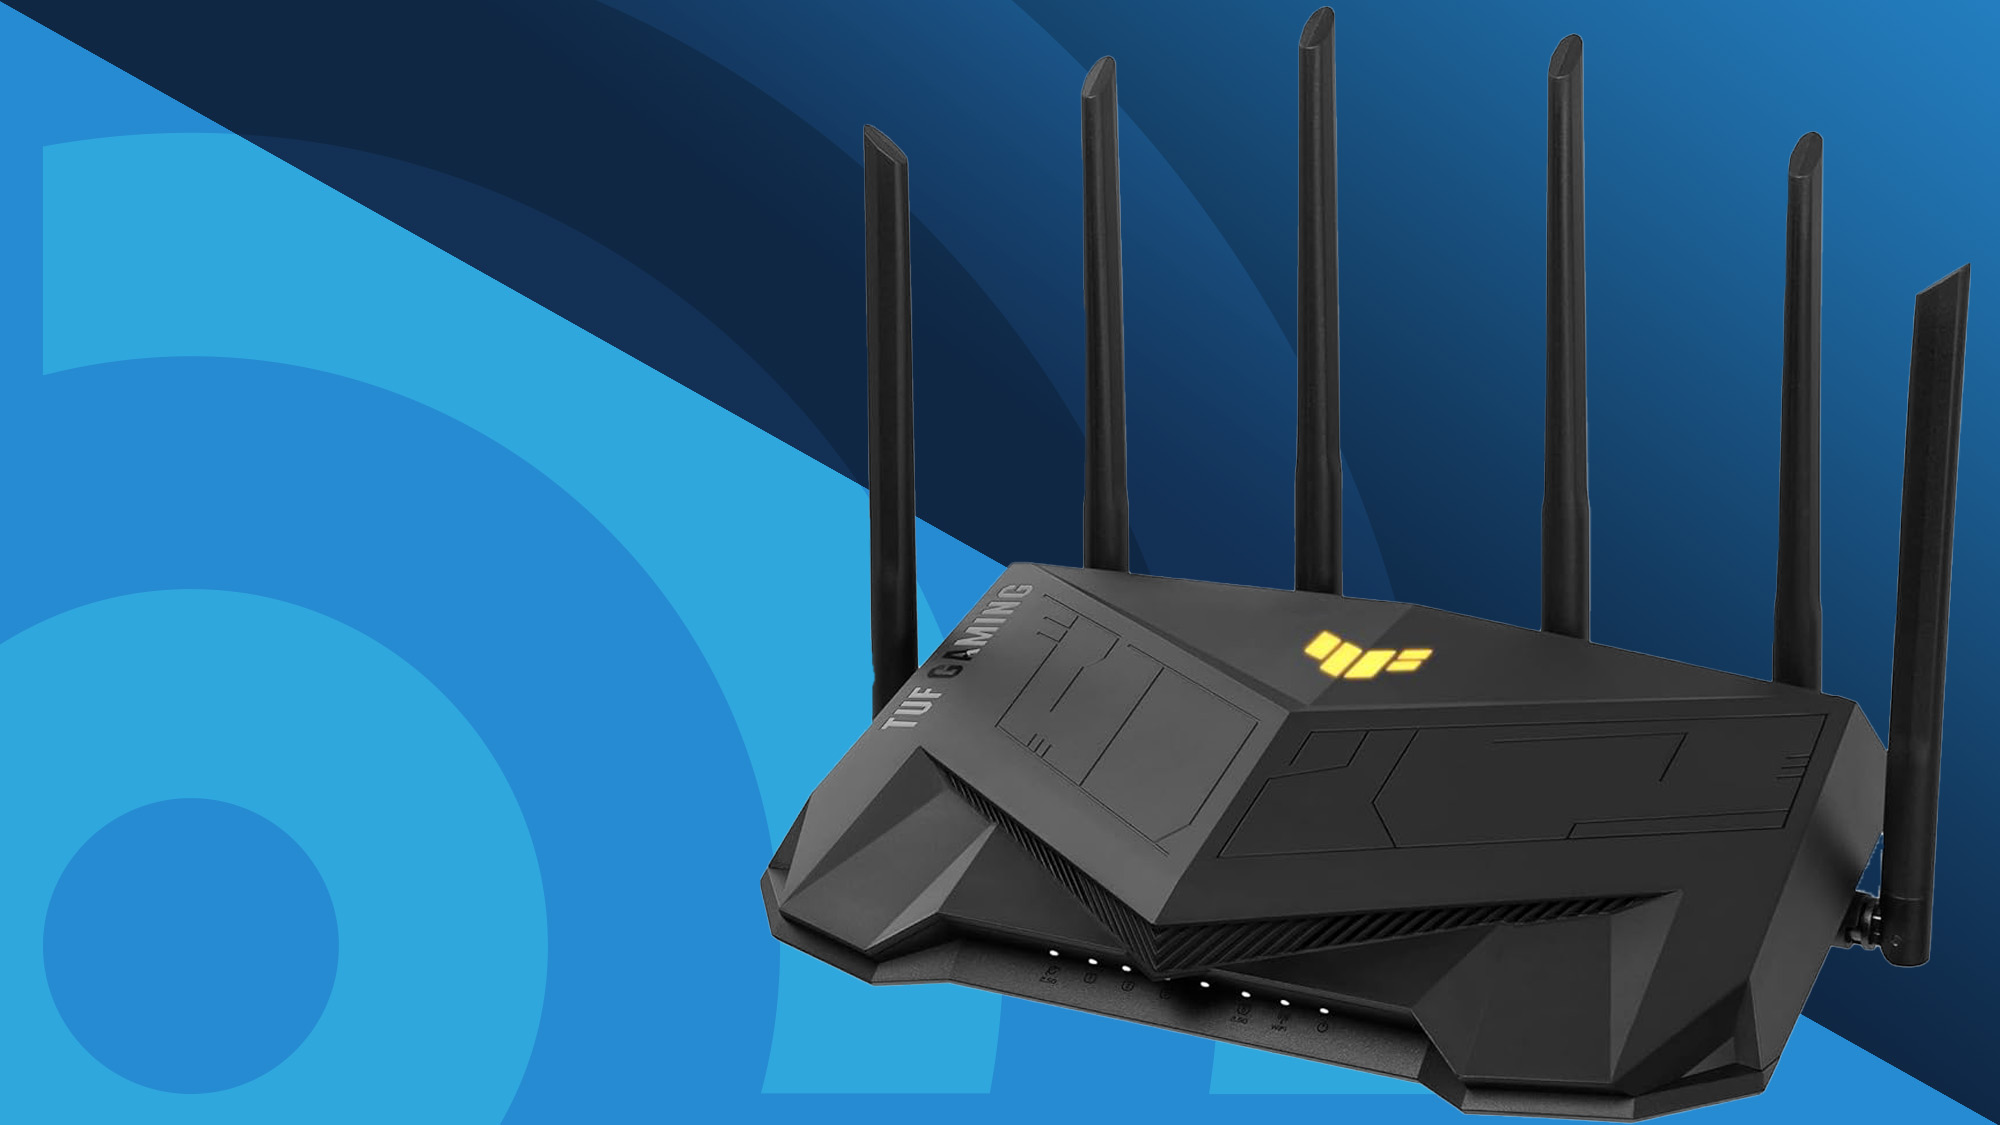 WiFi 6E Routers are Coming: Should I Replace My Current Router?